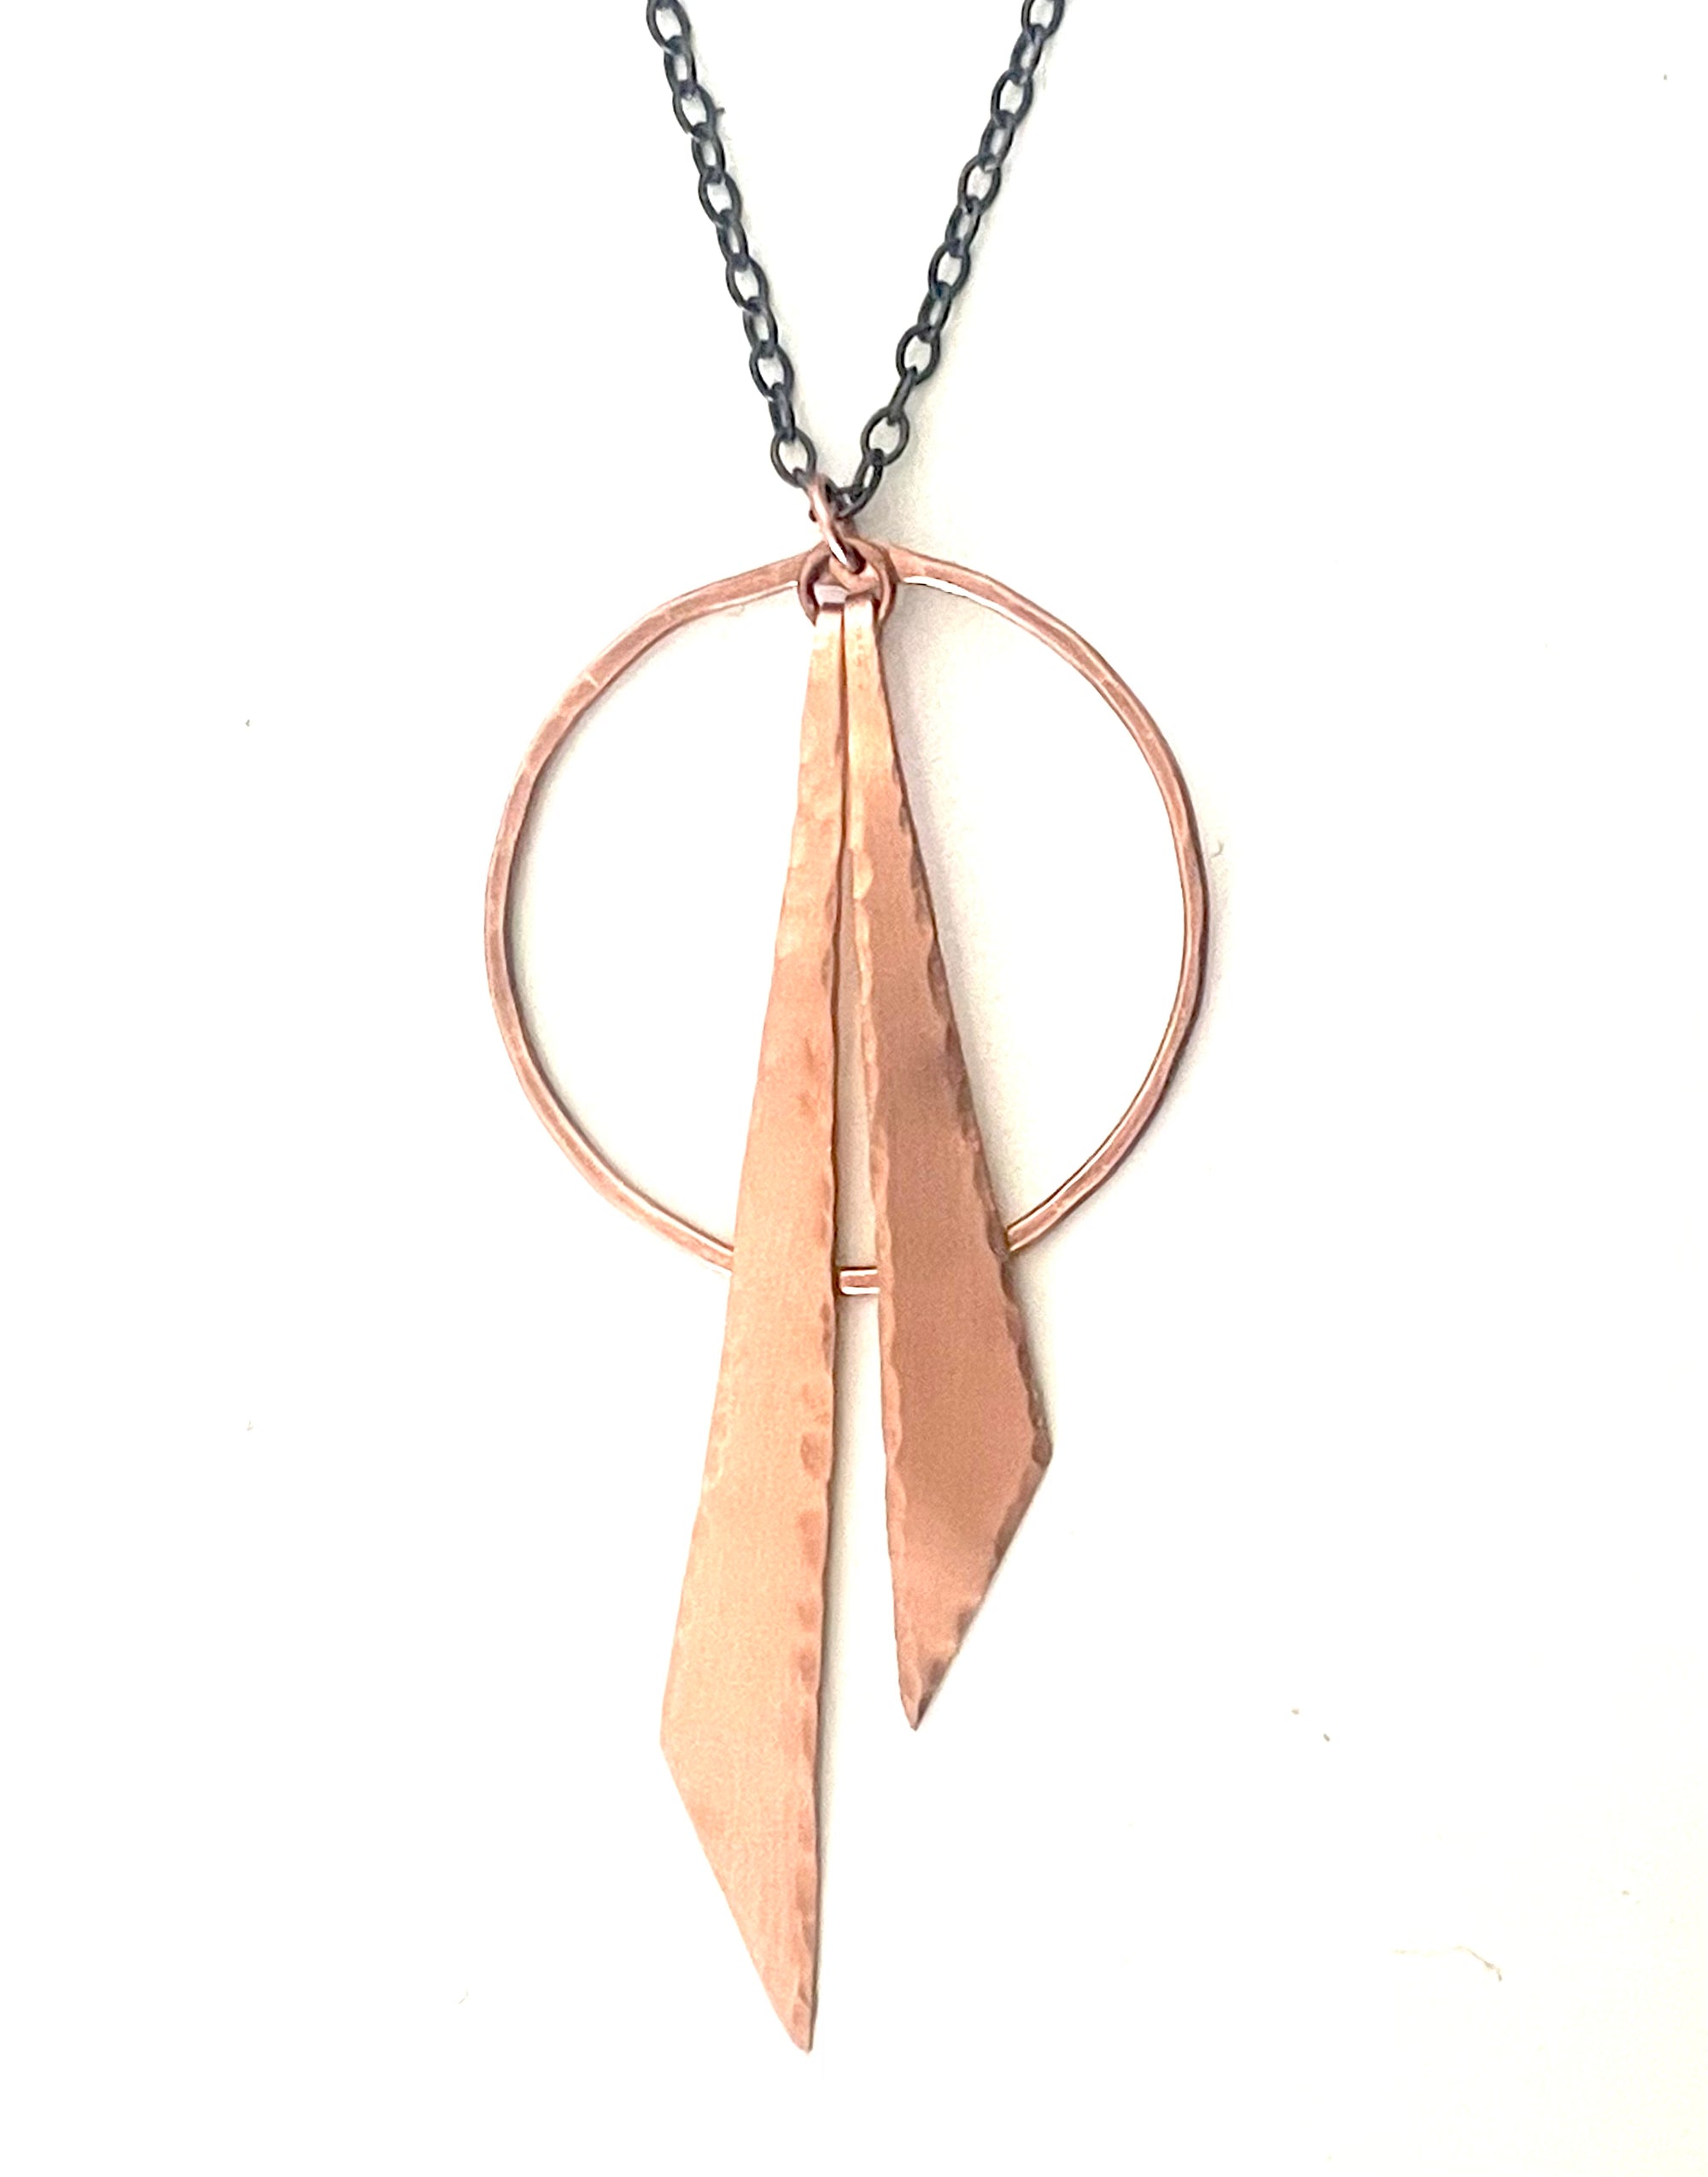 Circle and Slender Triangle Necklace